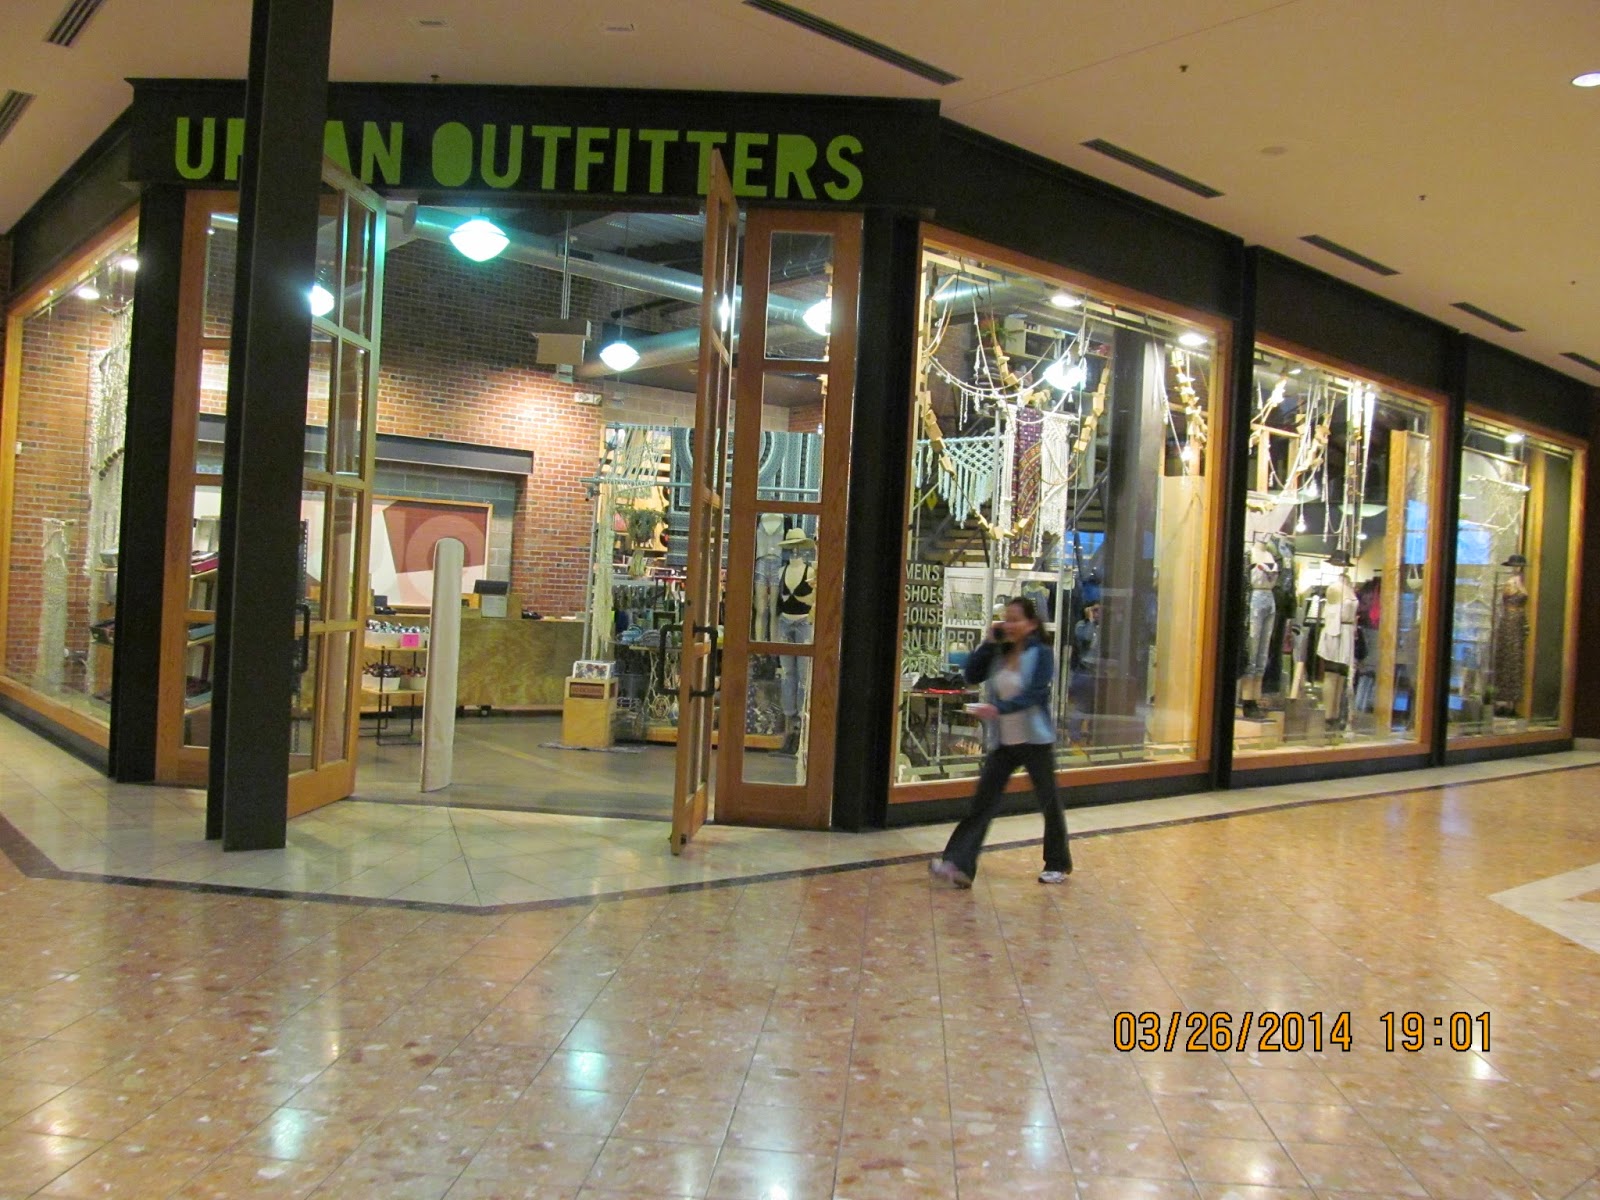 Trip to the Mall: St. Louis Galleria- (Richmond Heights, MO)